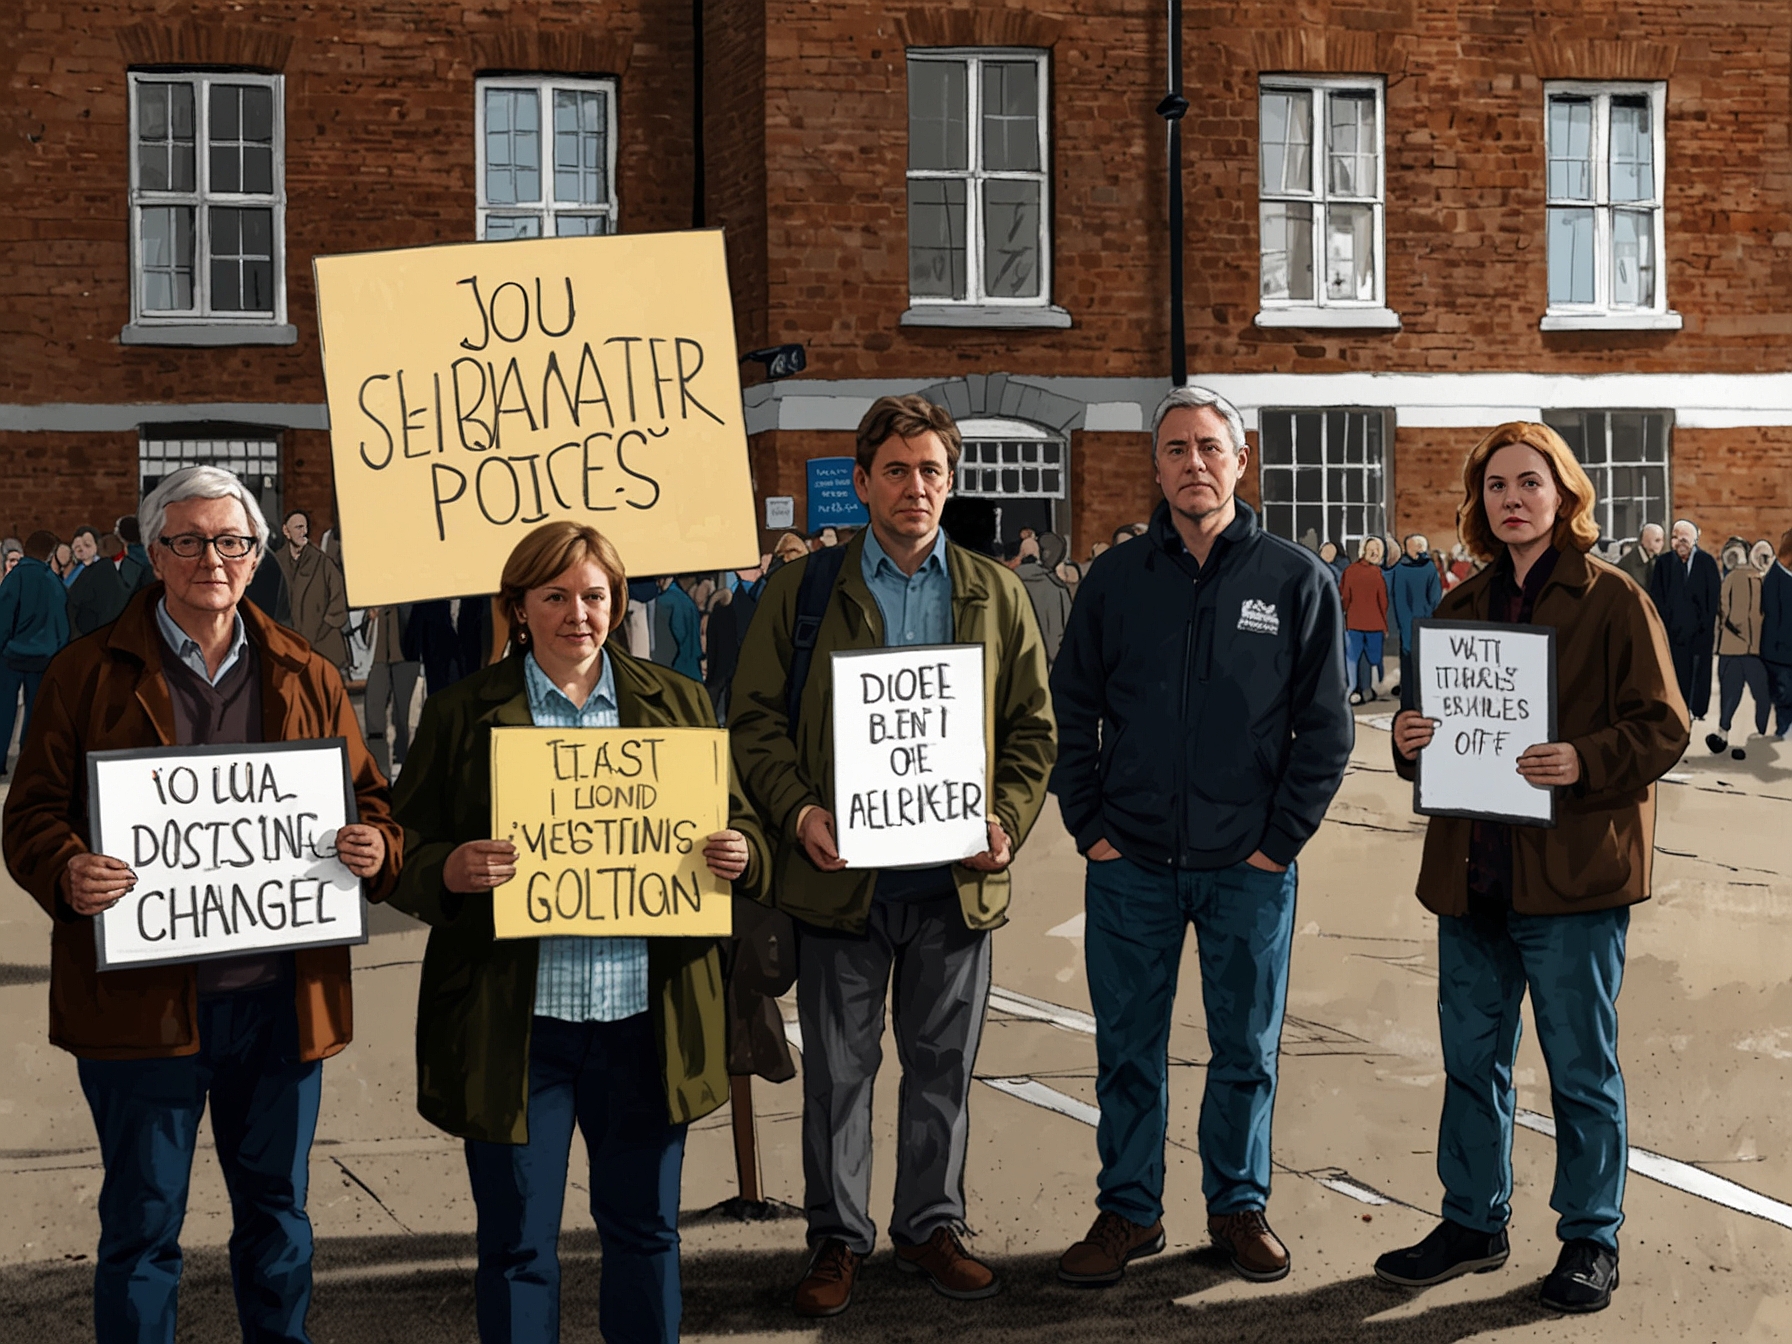 A group of UK voters discusses climate change, holding placards that demand stronger environmental policies, reflecting the public's growing concern ahead of the upcoming General Election.